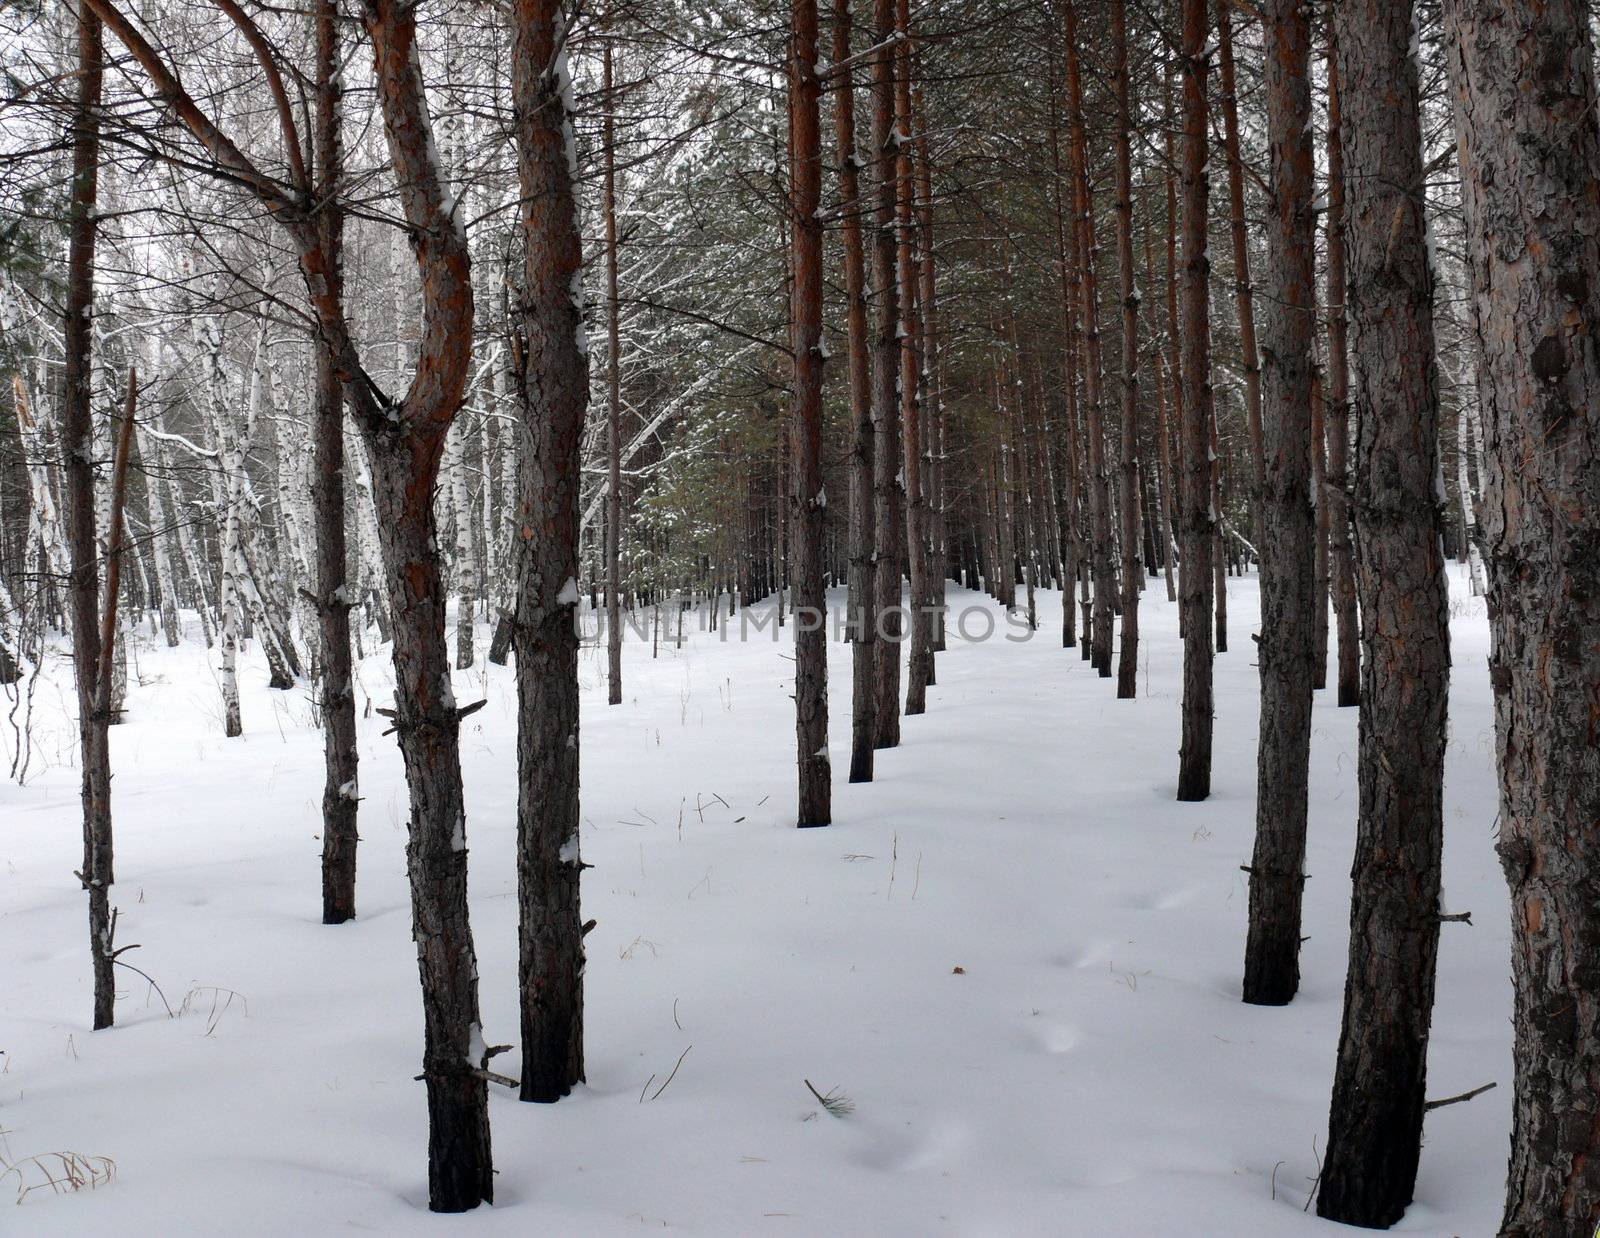 rows of pine-trees in winter forest